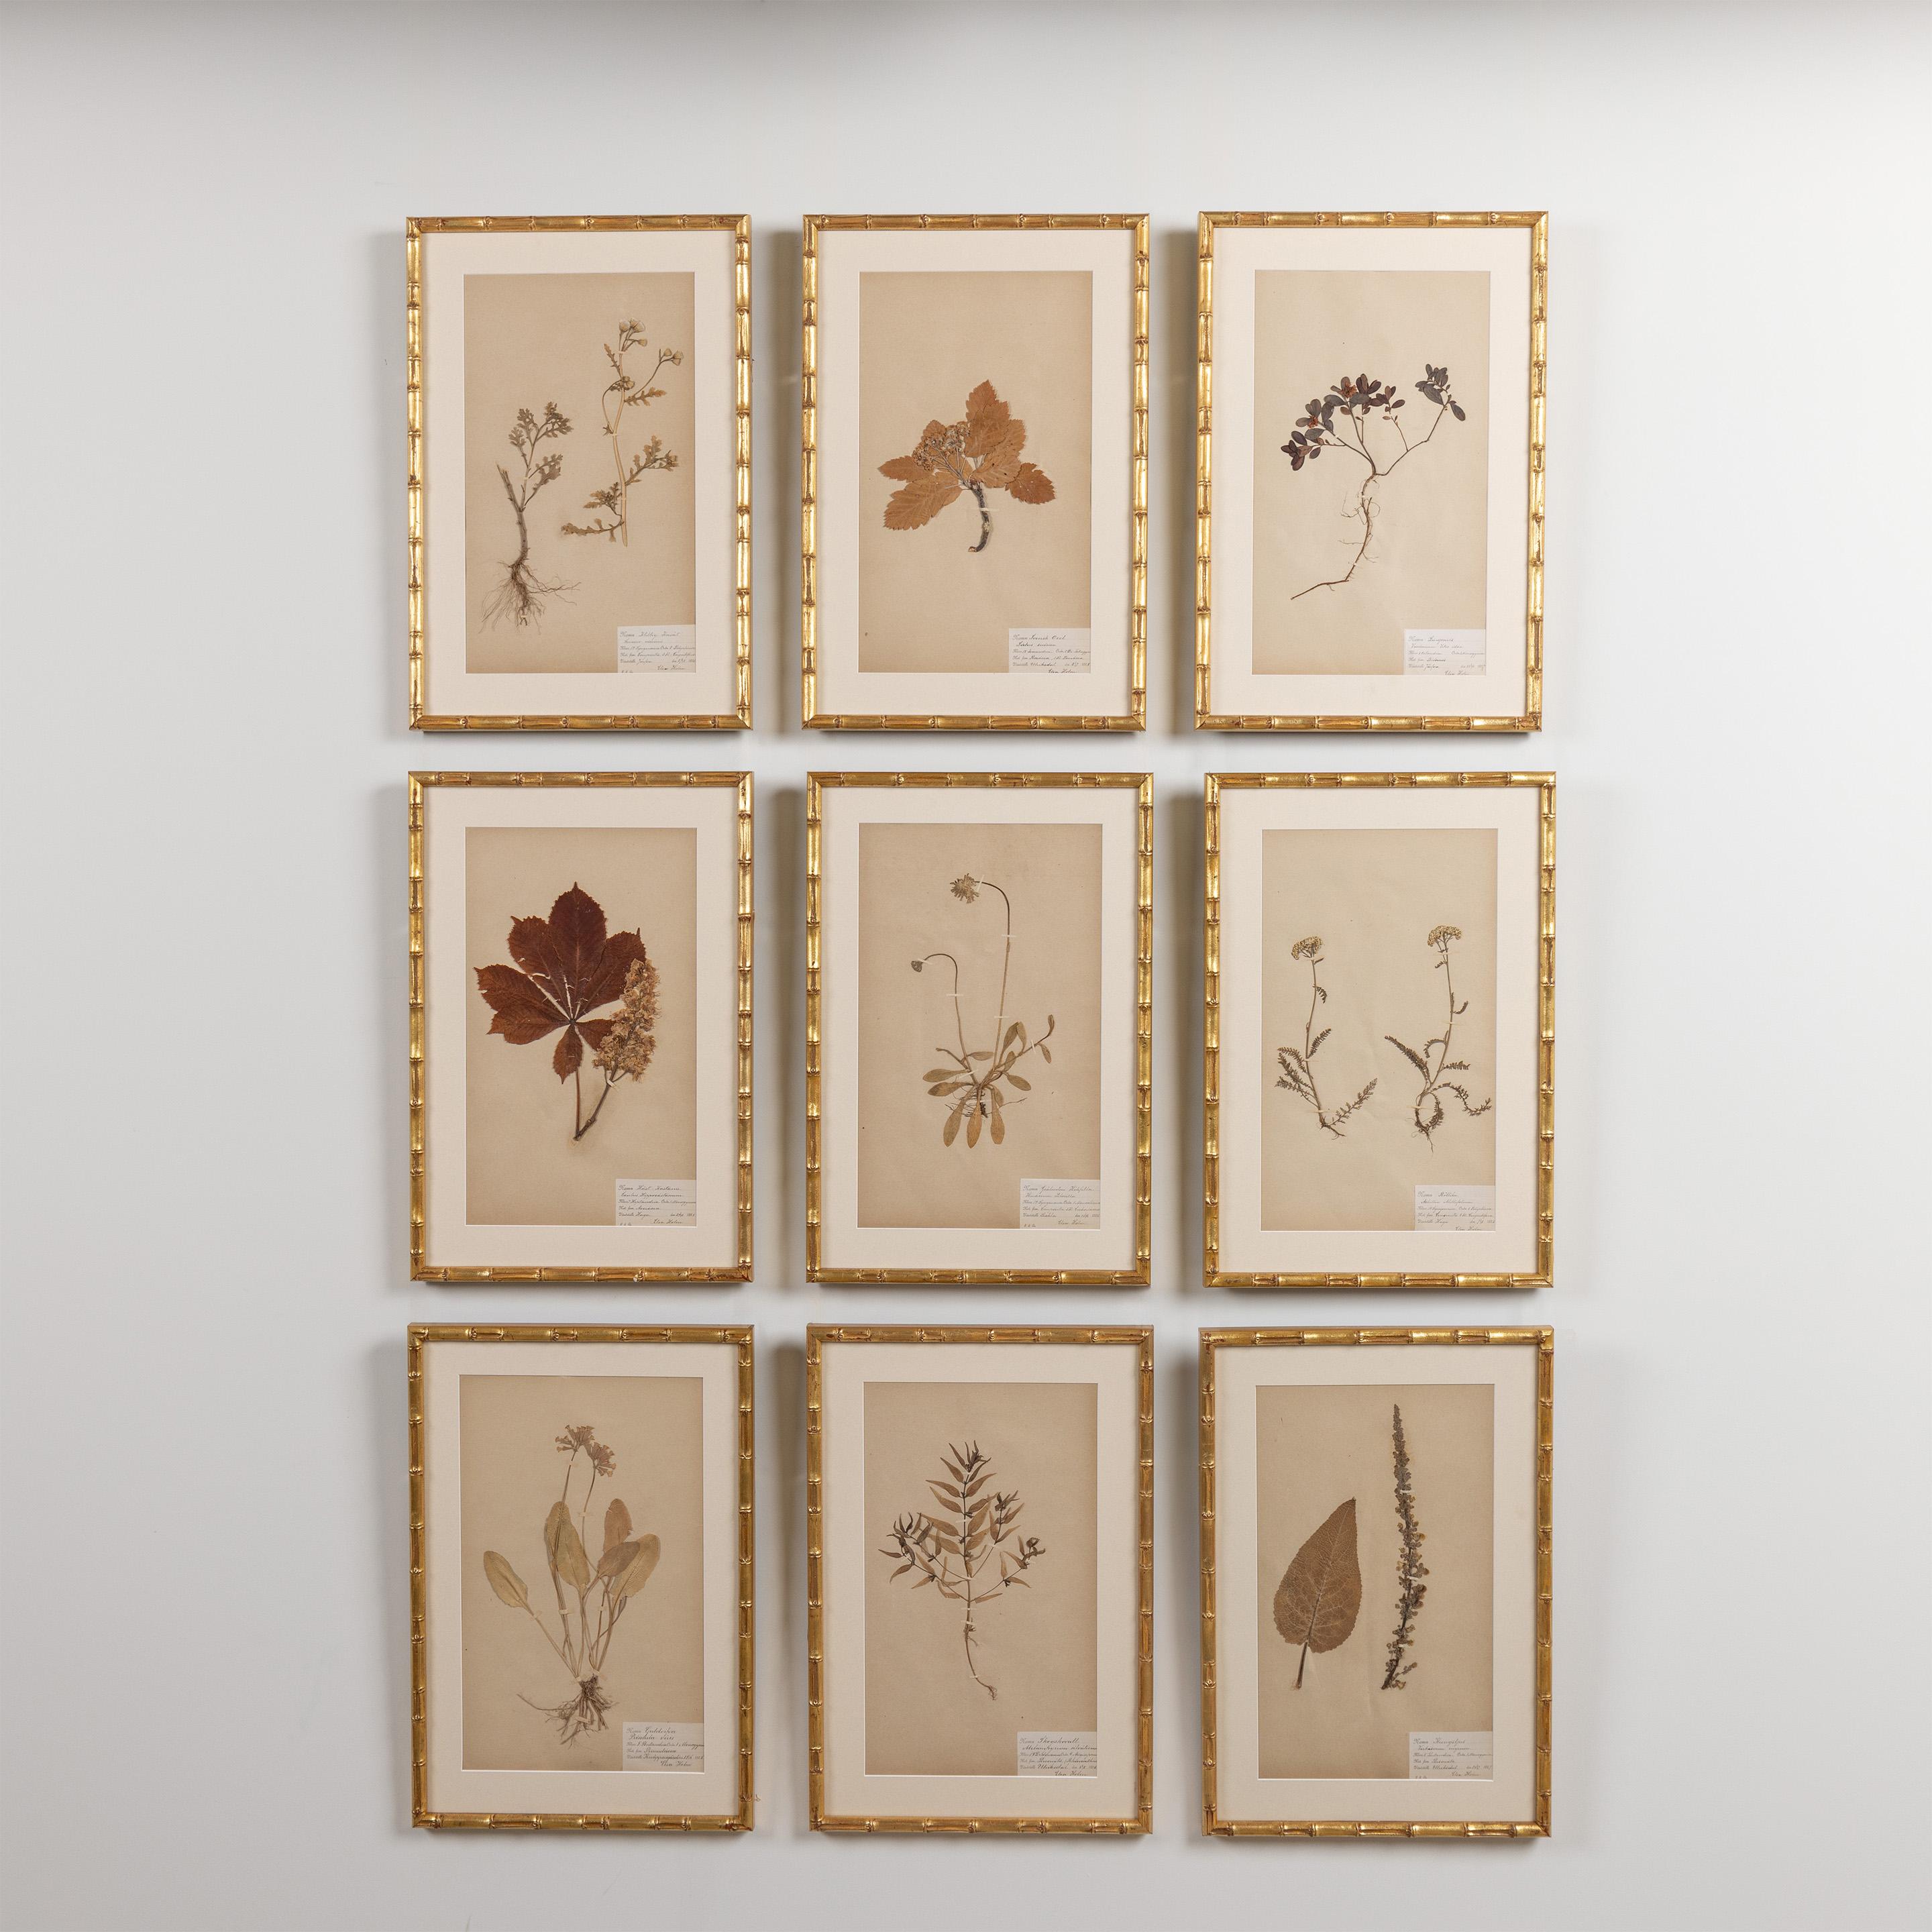 A beautiful collection of nine unusually large Swedish herbarium studies from the 19th c. with original dated labels. Catalogued by hand with the Latin name of the plant and the date. The dates are between 1885-1888. Archival quality framing with